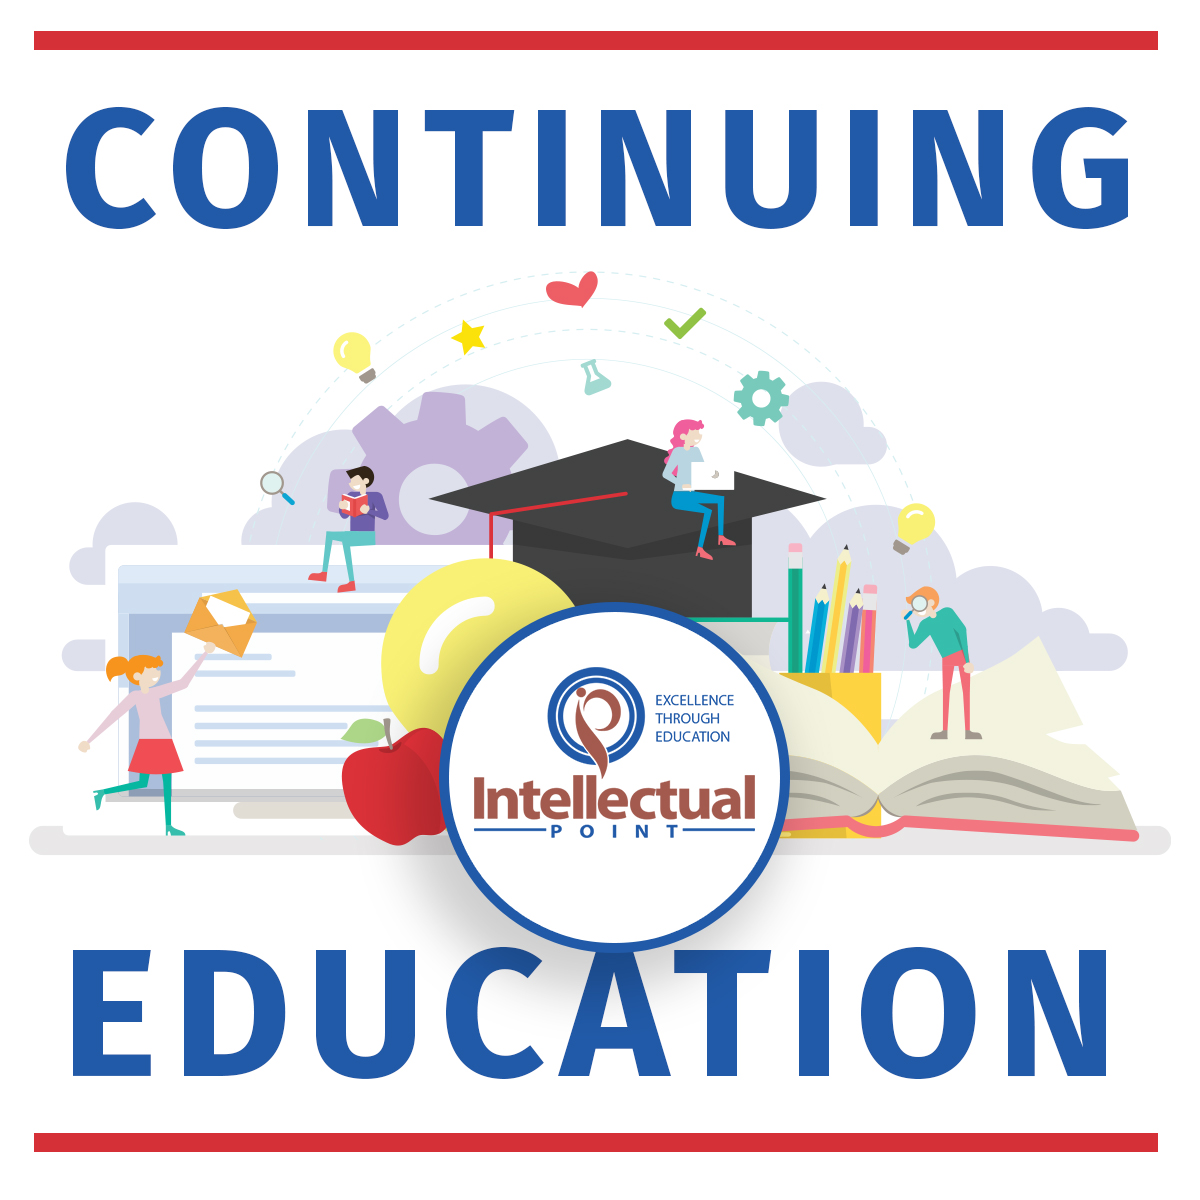 What are Continuing Education Units (CEU) and why do you need them